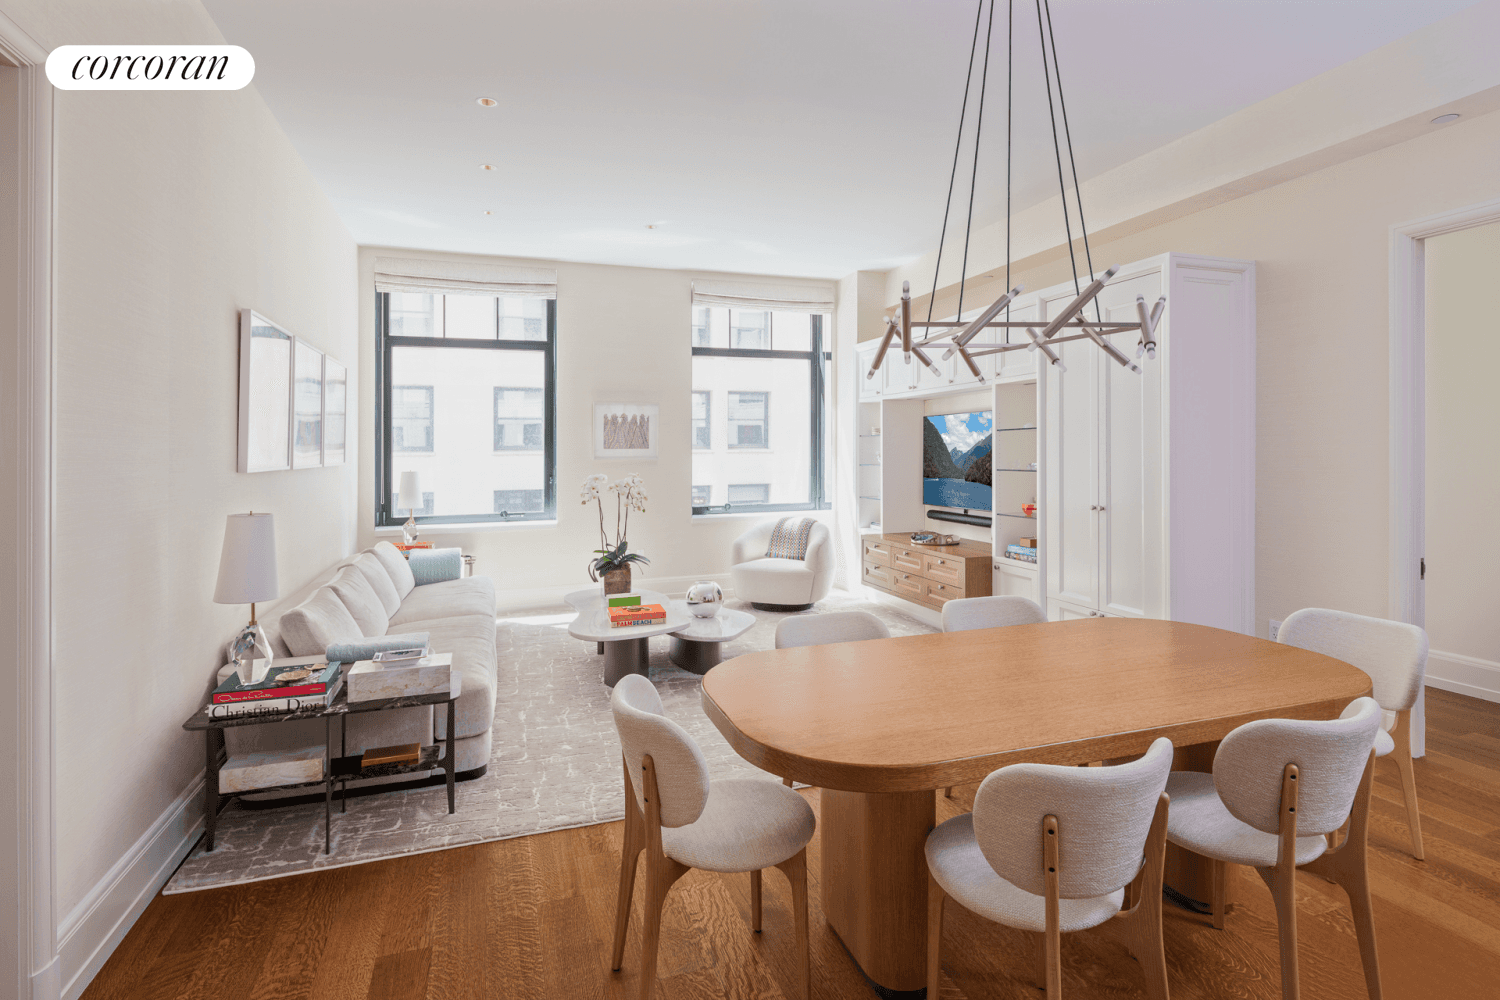 Situated in 10 Madison Square West, expertly conceived by world renowned designer Alan Wanzenberg, this luxurious residence is 1, 690 square feet with two bedrooms and two and a half ...